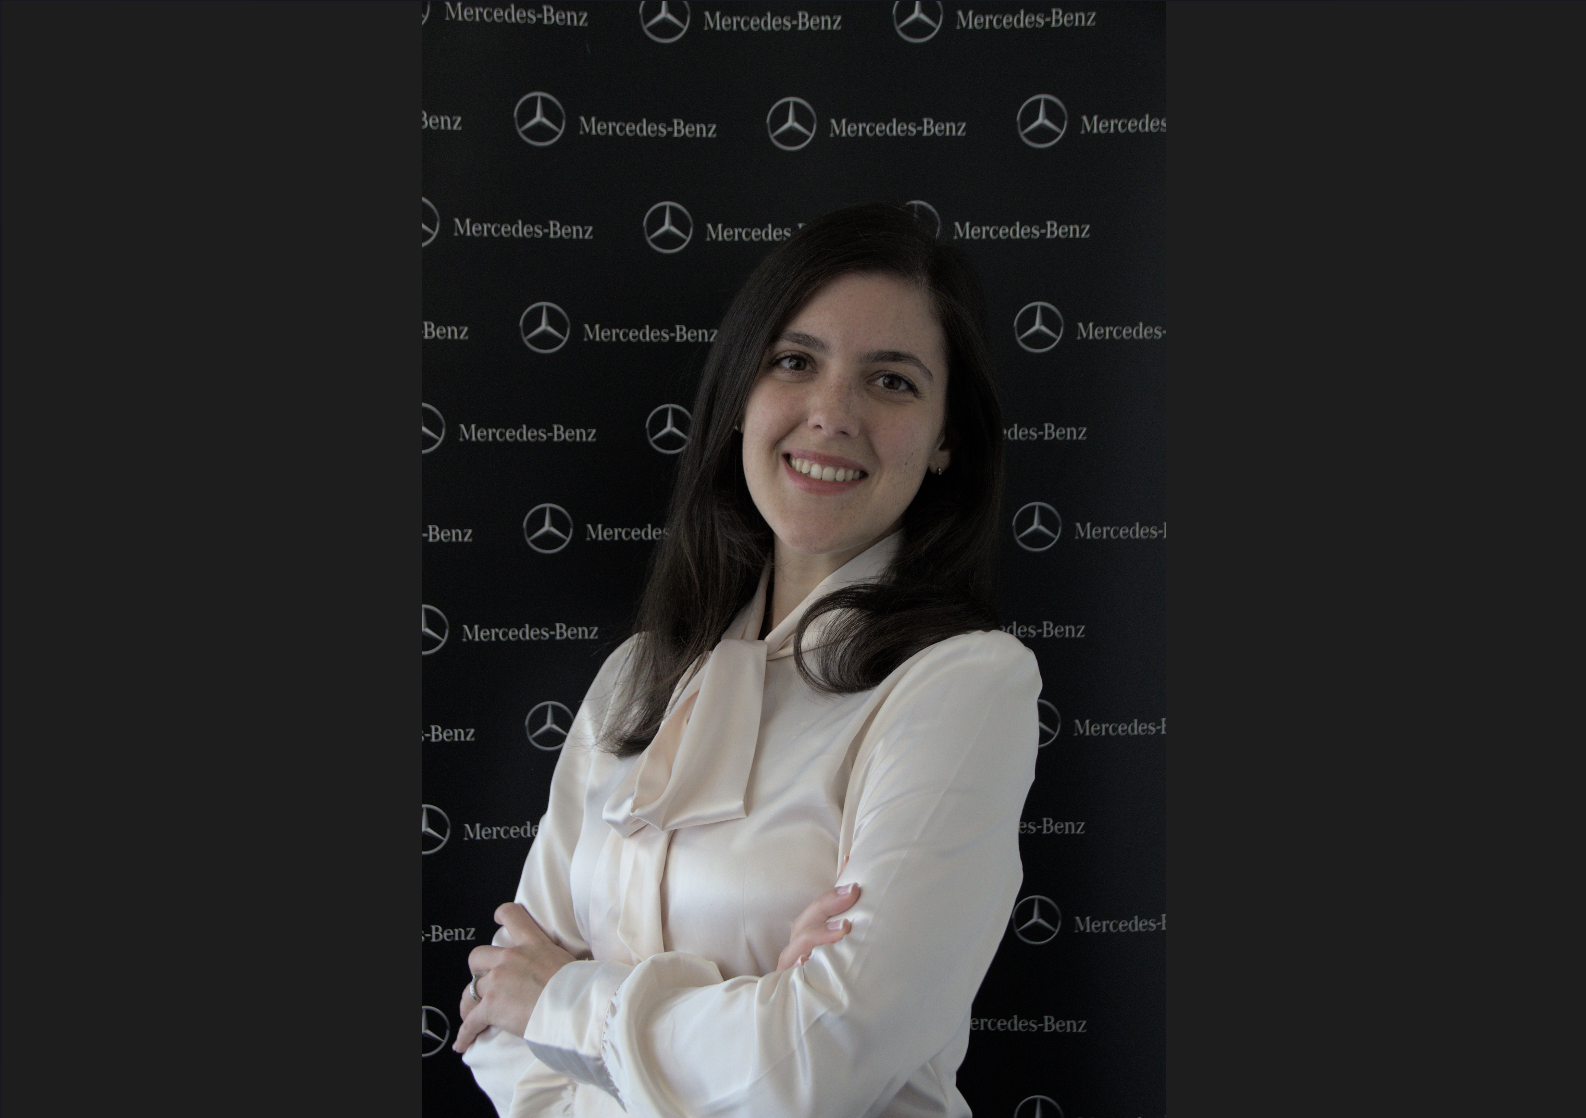 Experienced female CEO for Mercedes Benz